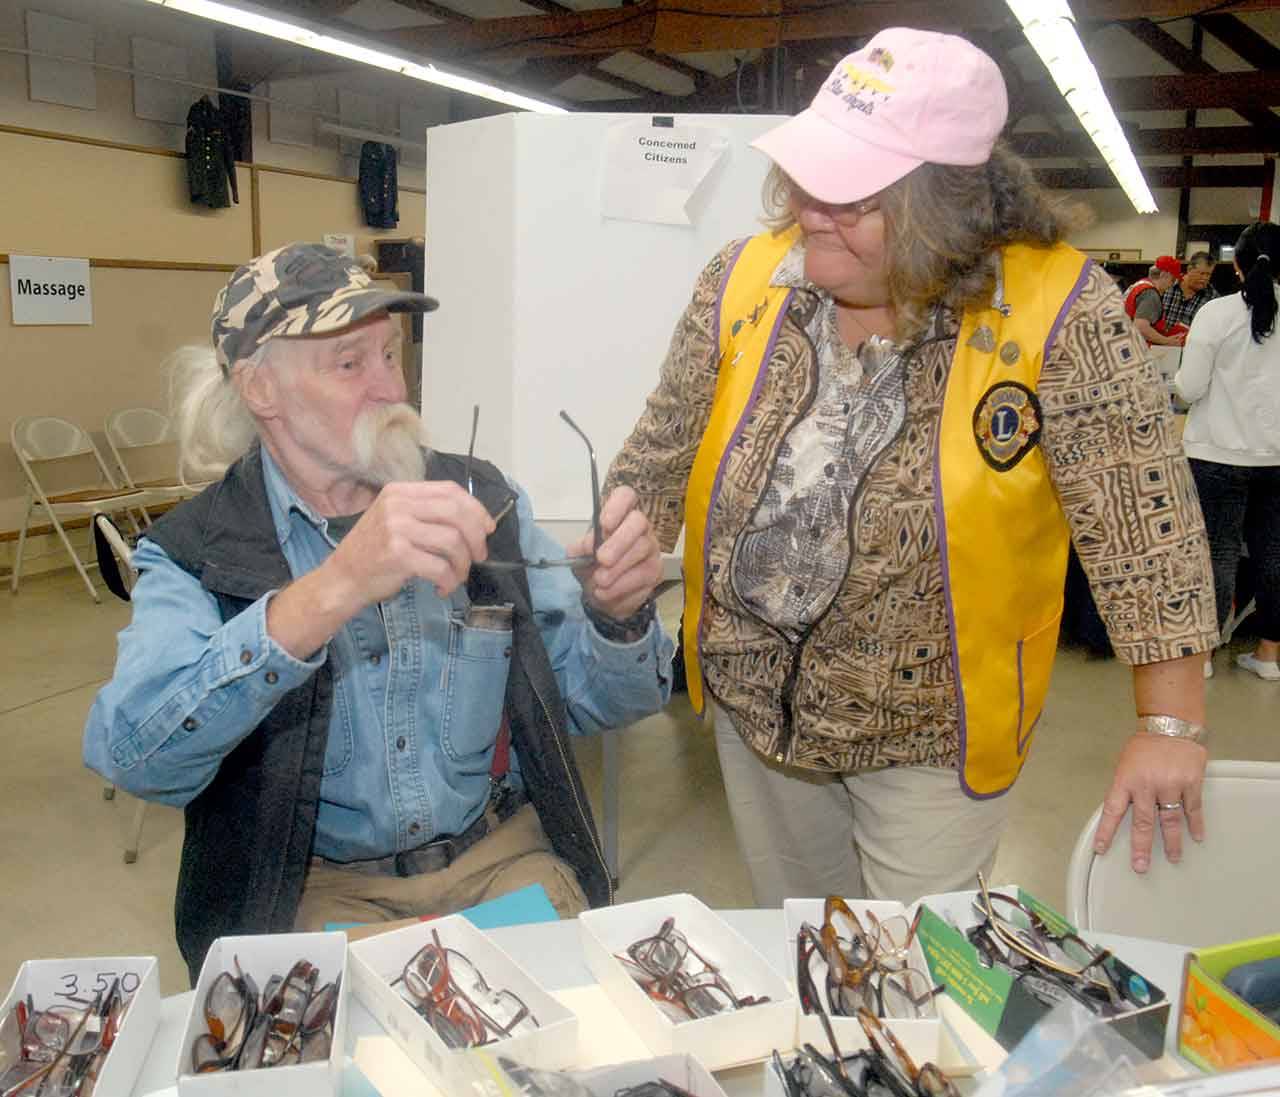 U.S. Navy veteran Ken Thela of Forks, left, shows delight in receiving a free pair of glasses from Sequim Valley Lions Club member Lee Martin during Thursday’s Voices for Veterans Stand Down at the Clallam County Fairgrounds in Port Angeles. (Keith Thorpe/Peninsula Daily News)